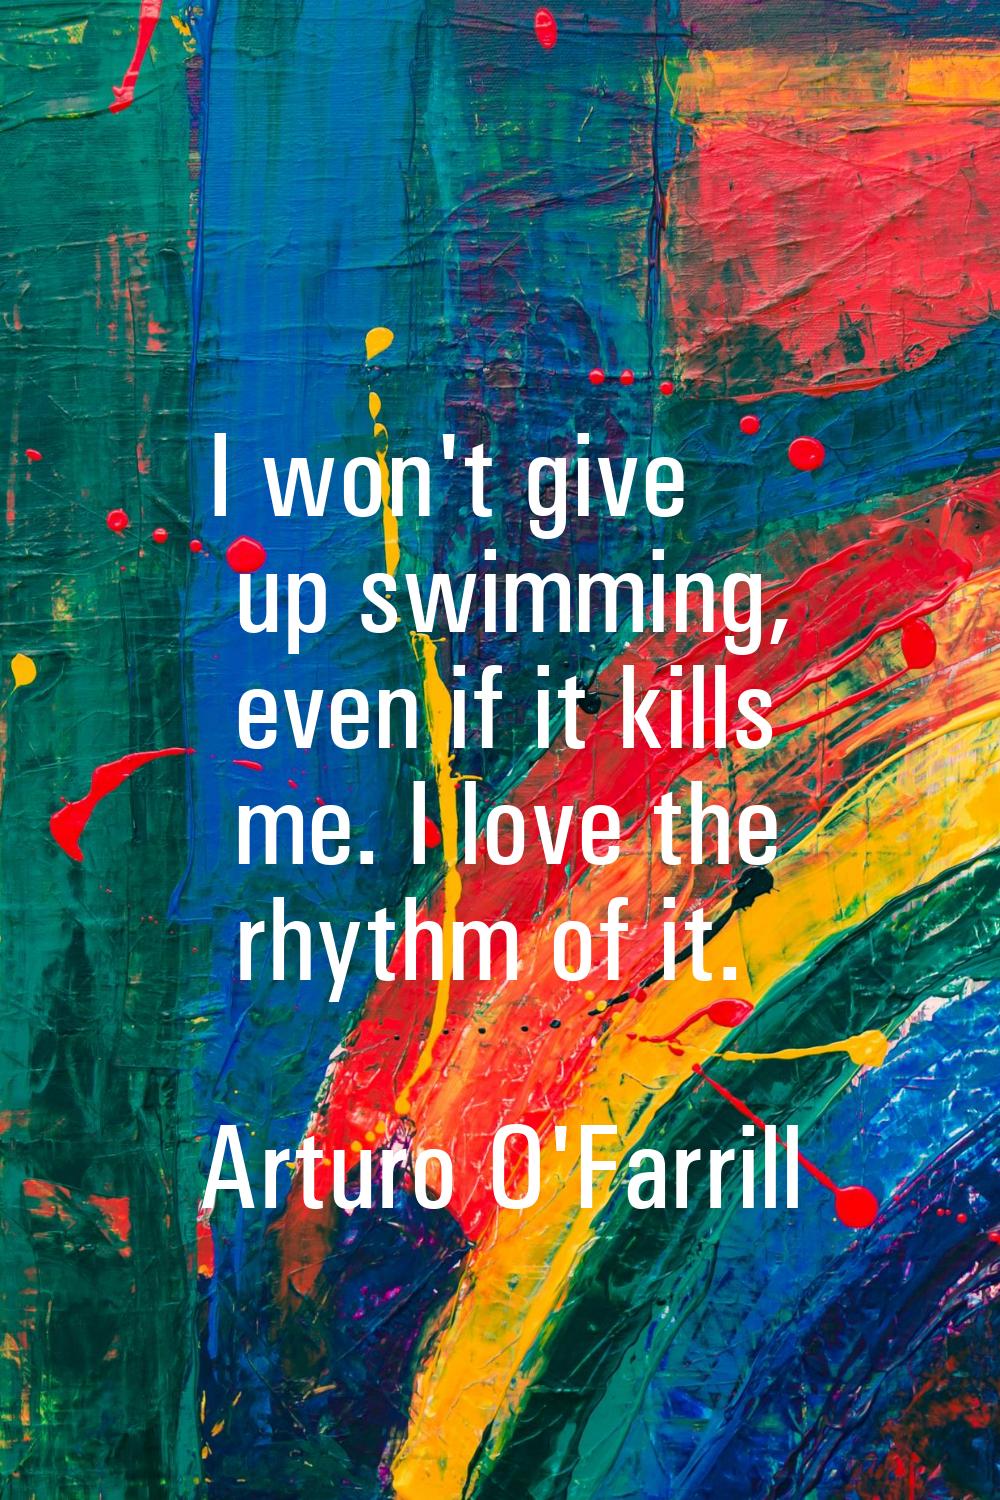 I won't give up swimming, even if it kills me. I love the rhythm of it.